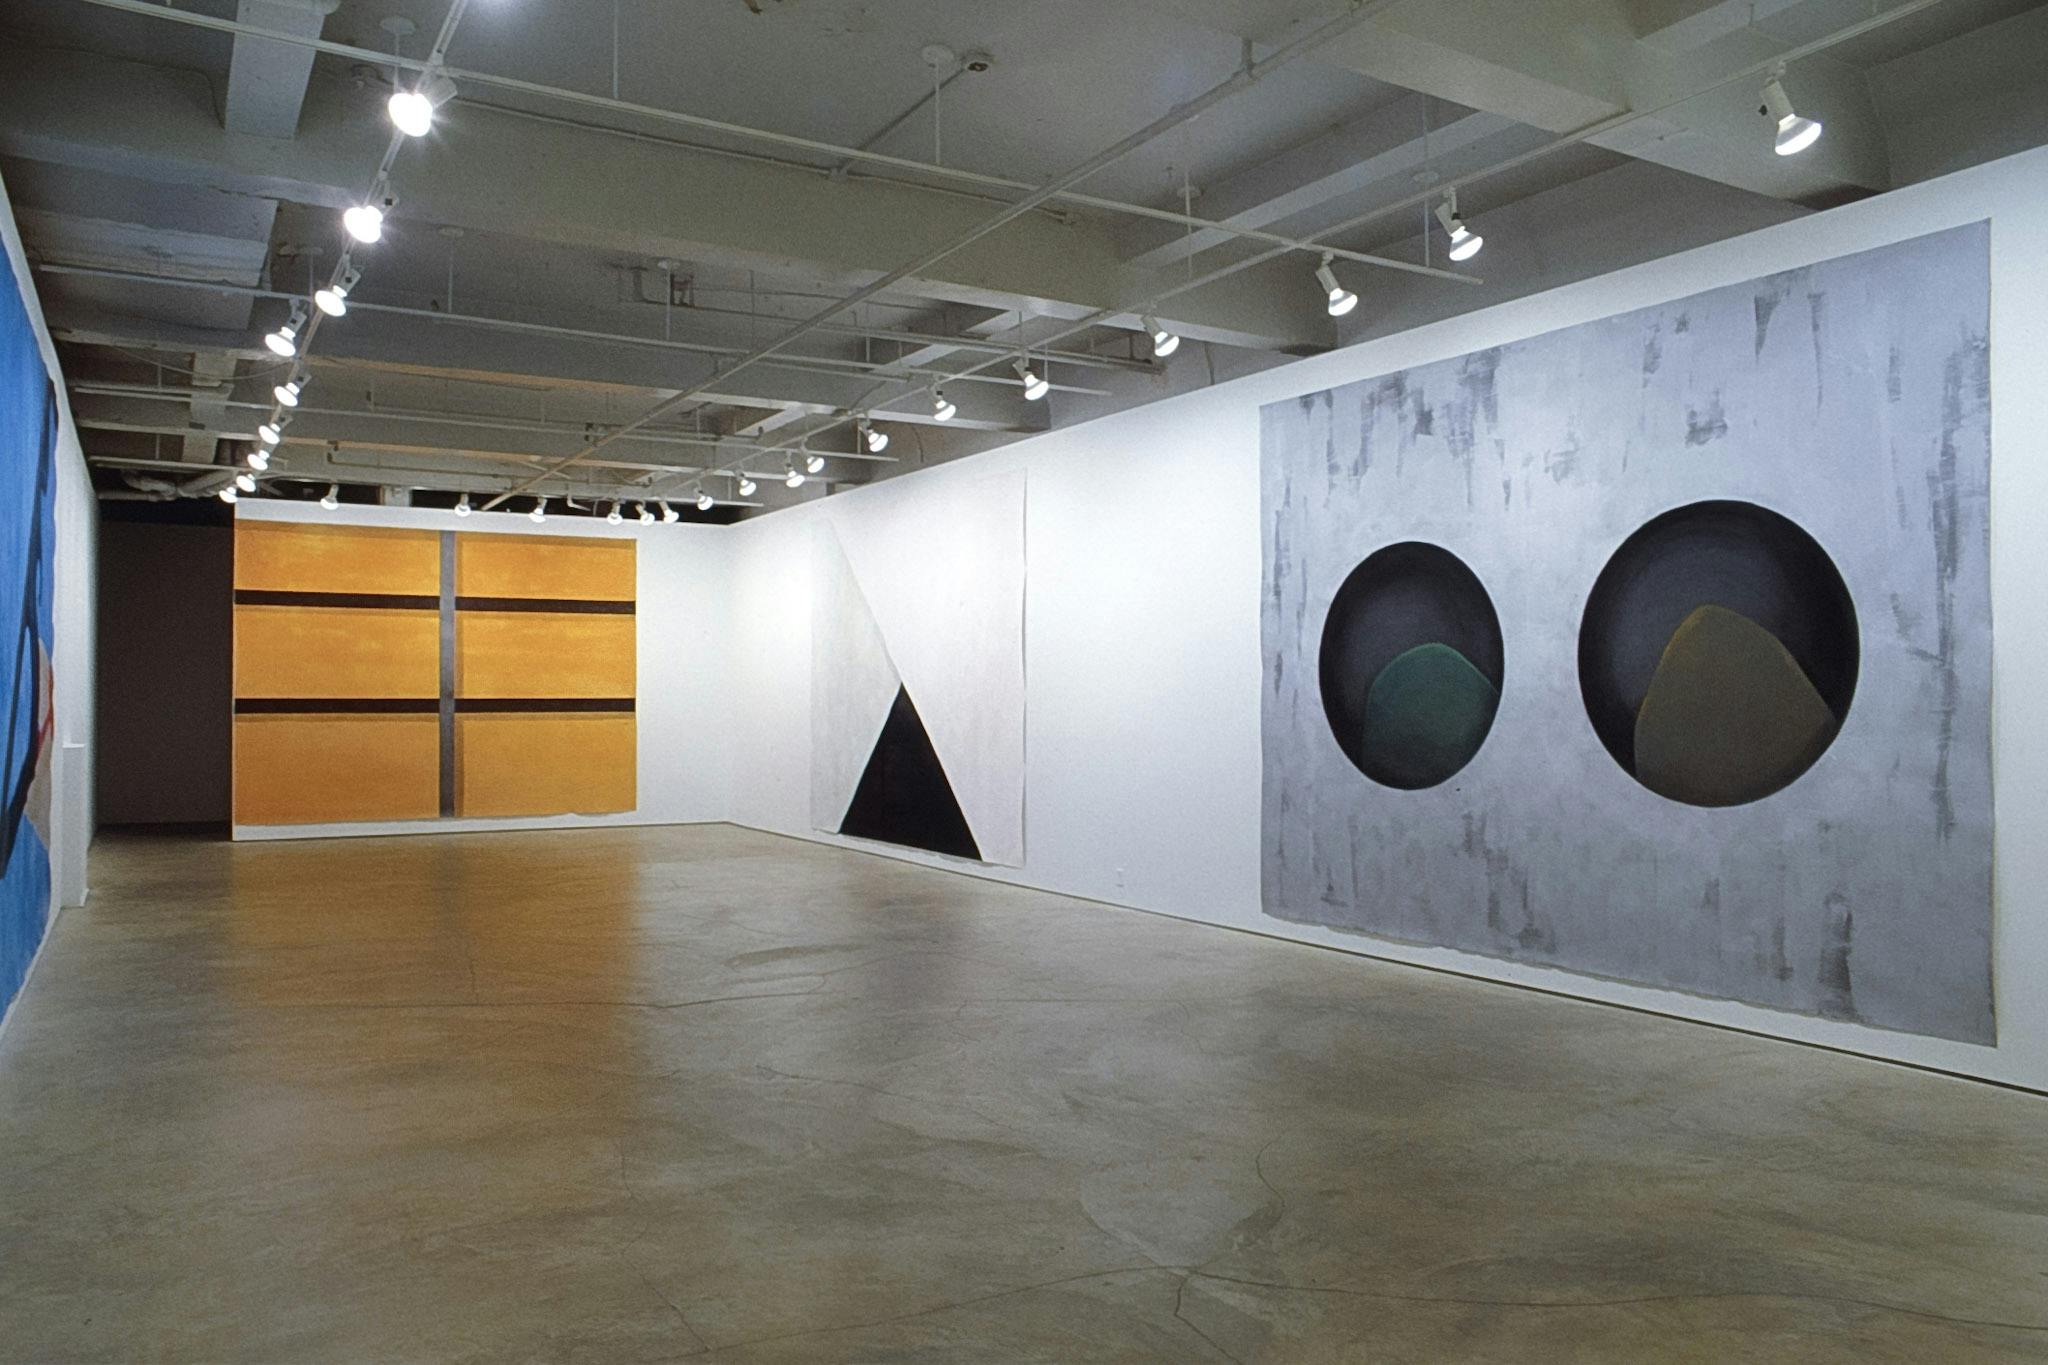 Four paintings are installed in the gallery. Two on the right side wall depict black geometric shapes. The one on the inner wall shows six orange rectangles. The one on the left side wall is blue.